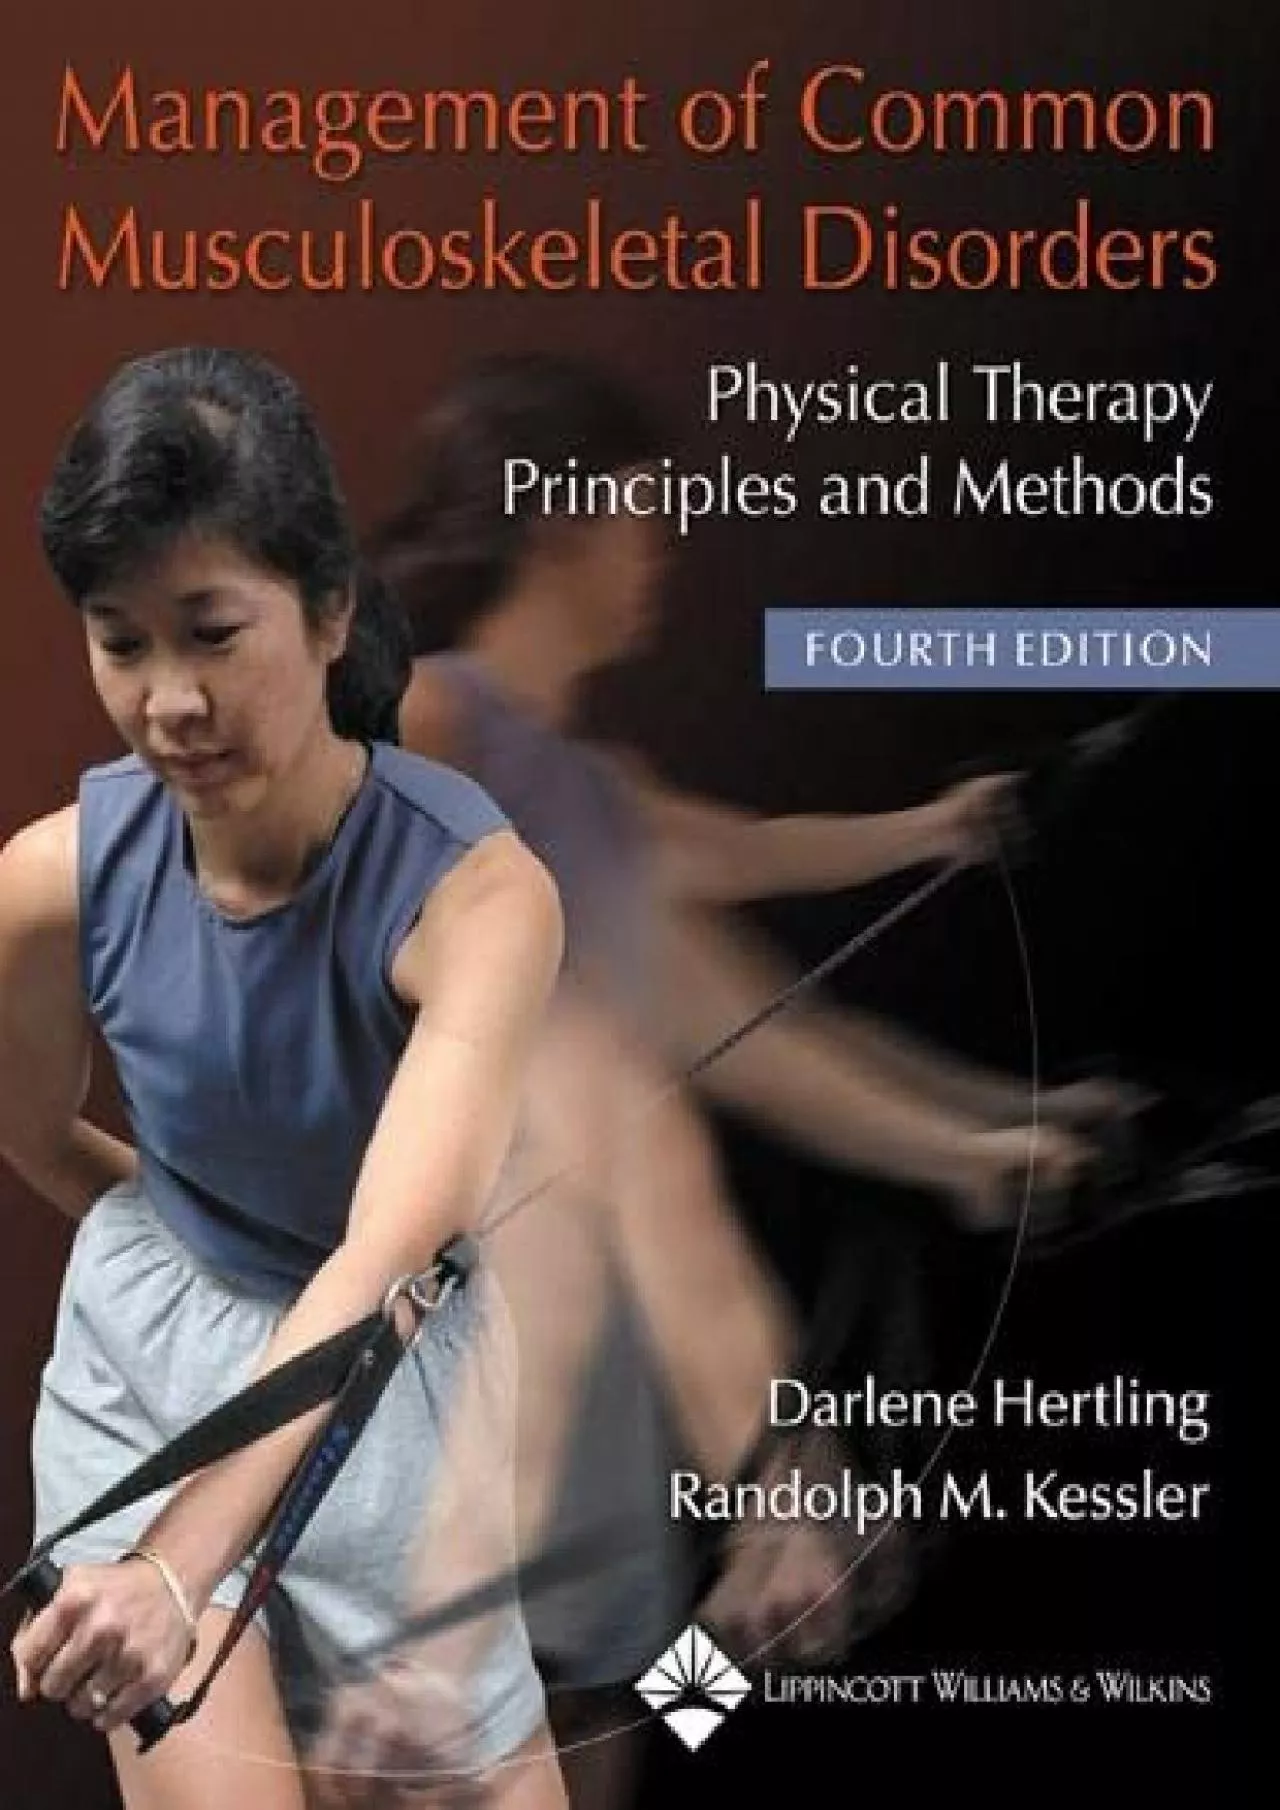 (BOOK)-Management of Common Musculoskeletal Disorders: Physical Therapy Principles and